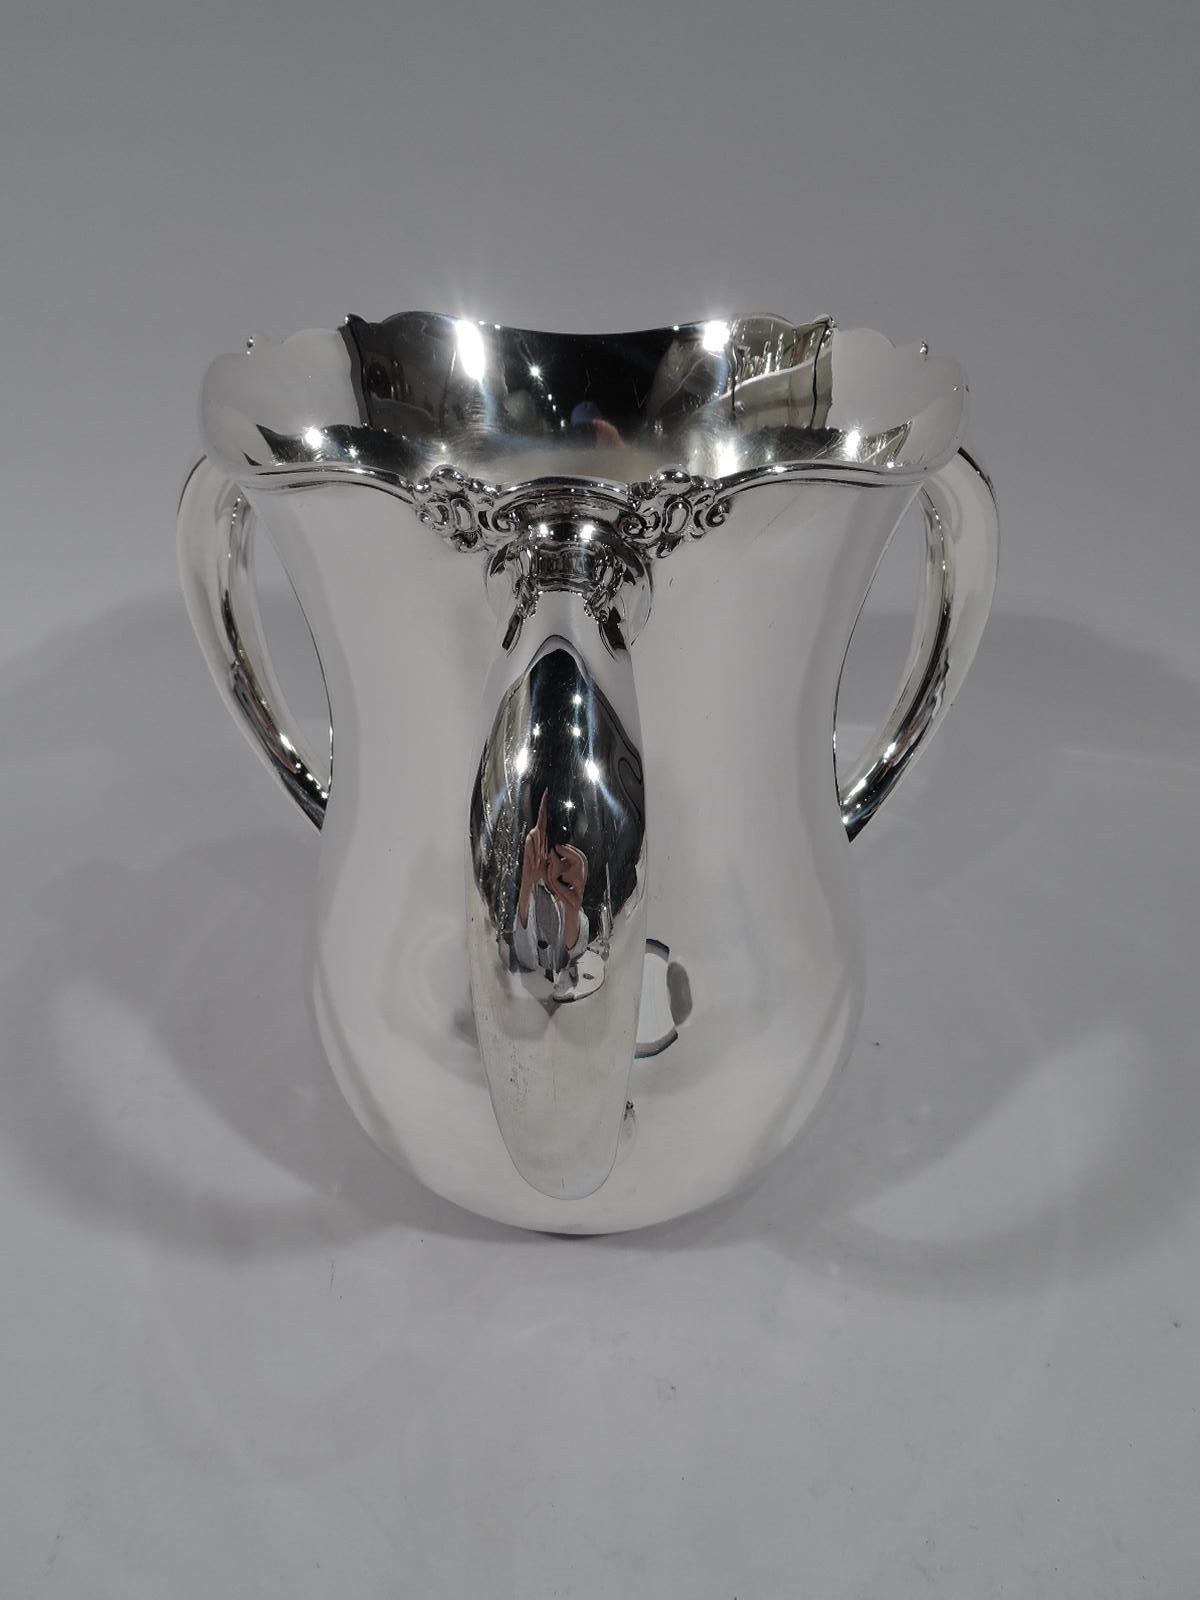 Turn-of-the-century American sterling silver loving cup. Traditional baluster with 3 C-scroll handles and molded wavy rim interspersed with scroll bunches. Lots of room for engraving. Fully marked including maker’s stamp (Fuchs), no. 1660, and